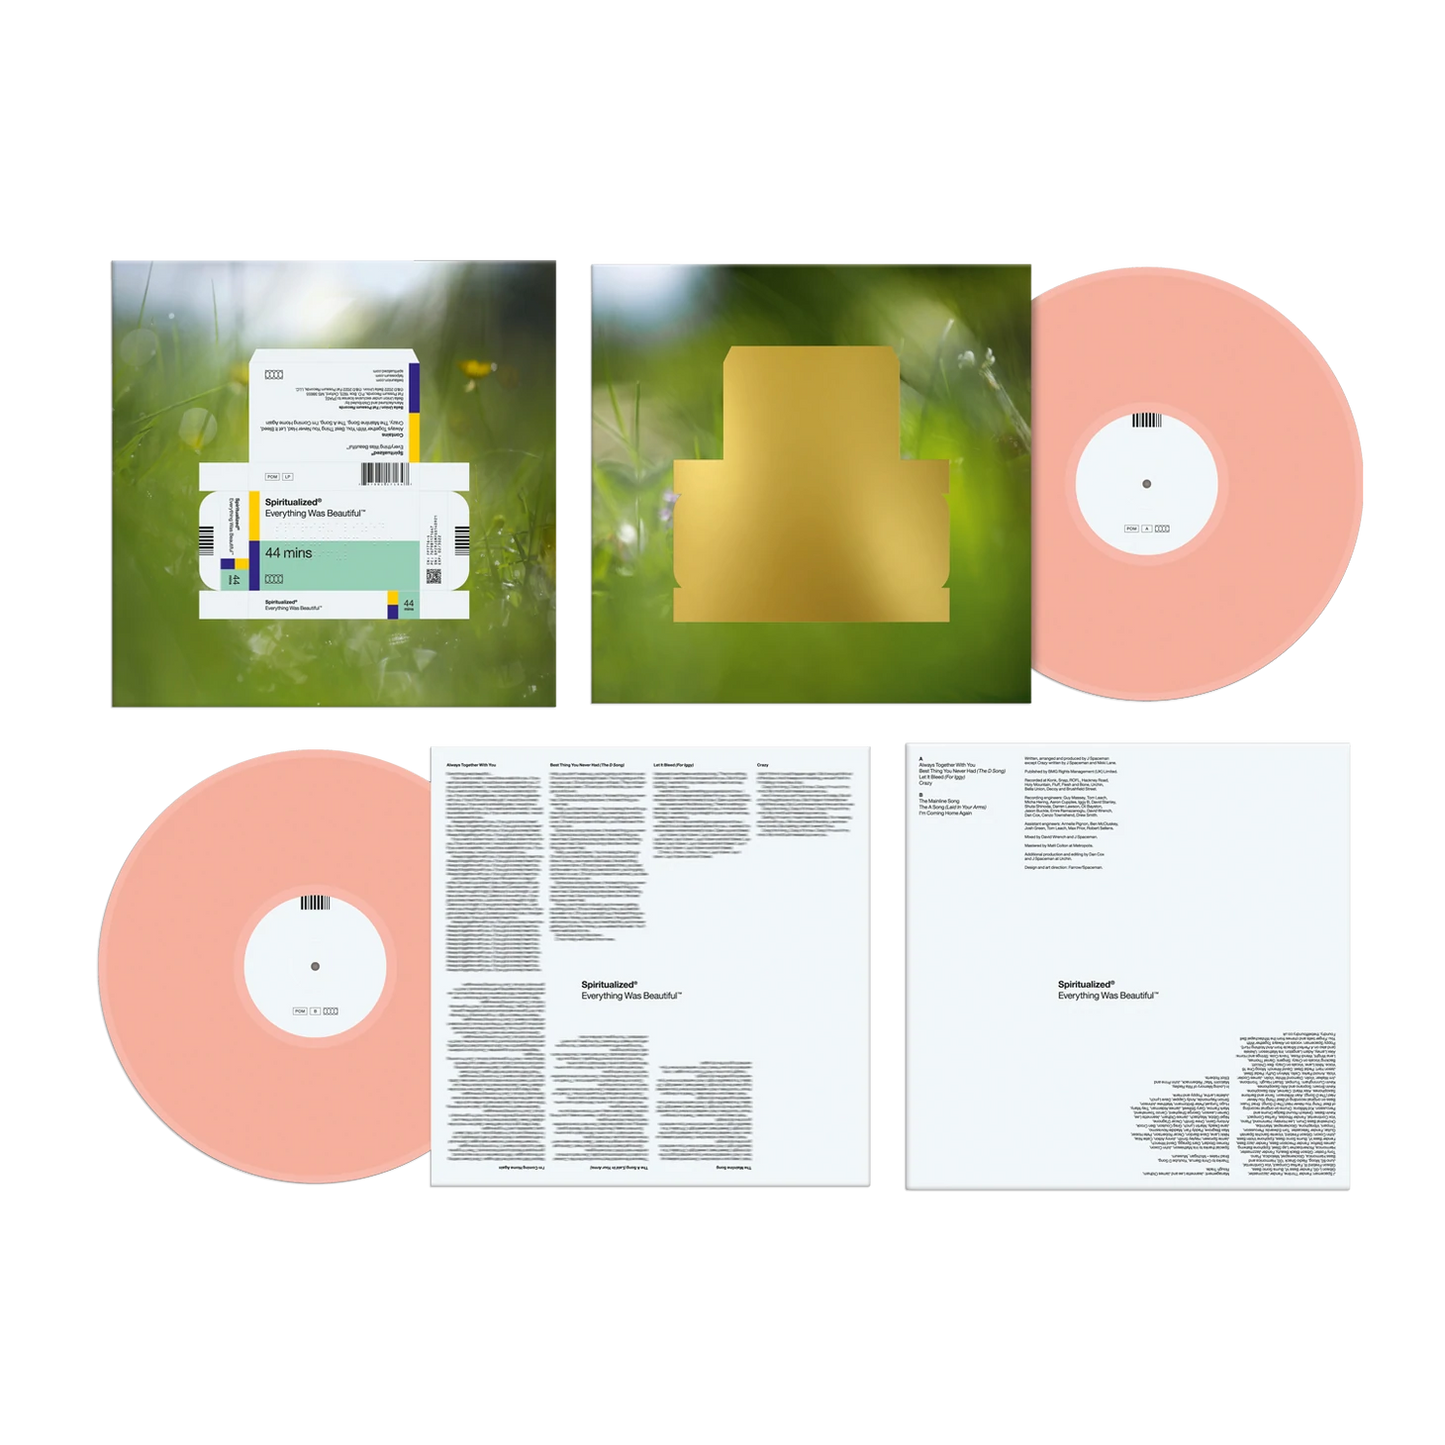 Spiritualized - Everything Was Beautiful (Pink Vinyl, indie-retail exclusive)